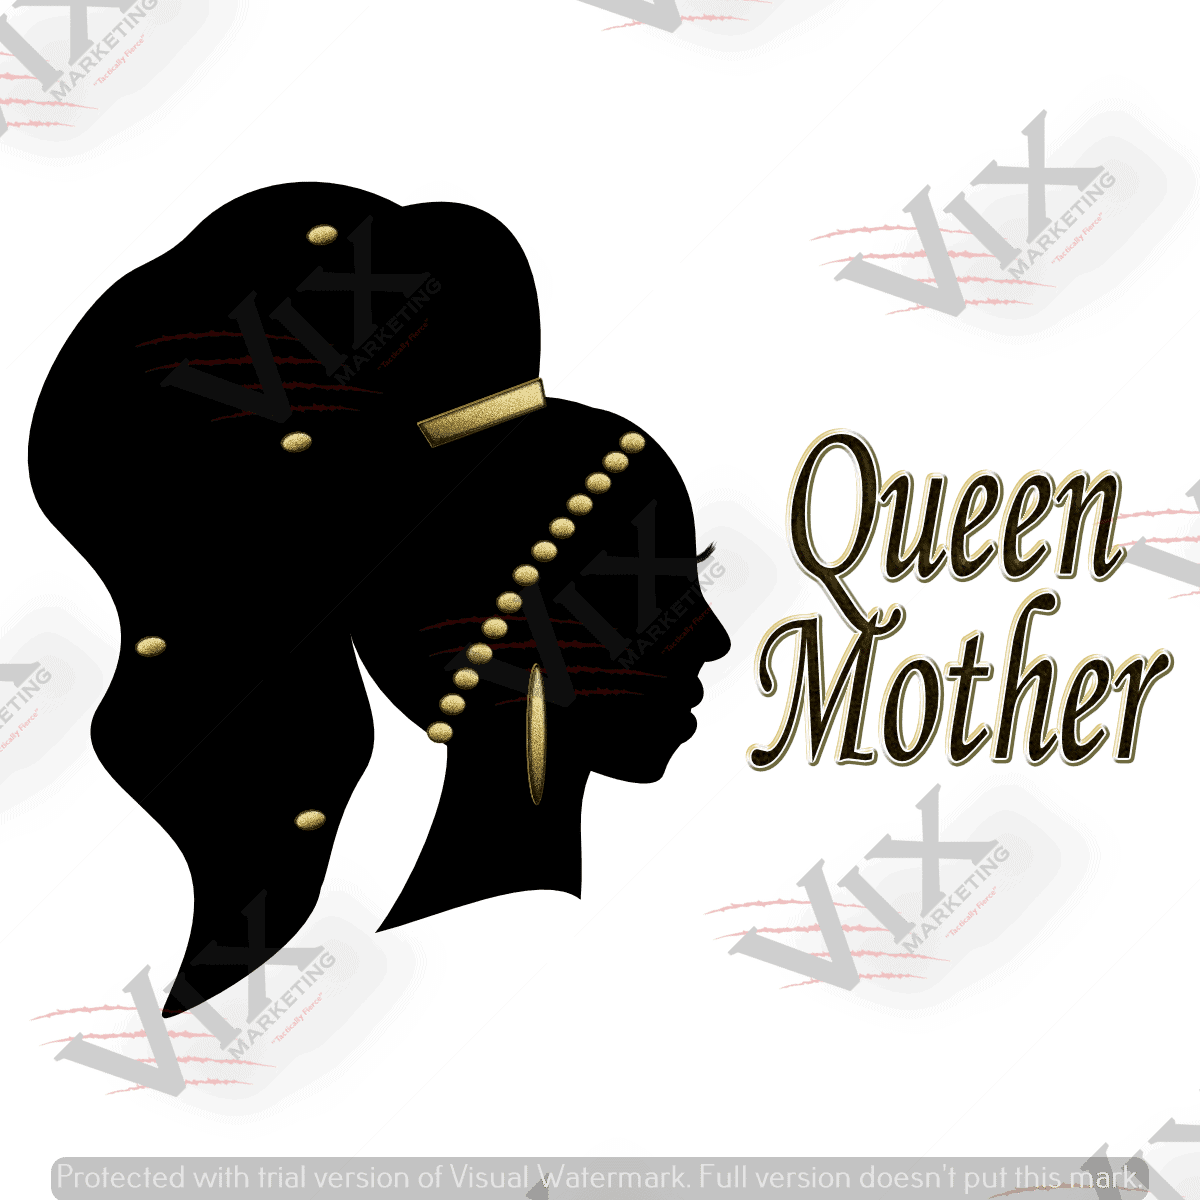 Download Queen Mother High Long One Plait W Gold Hair Studs Head Band Gold Earring Female Profile Silhouette Original Graphics 4 X 4 300dpi Cmyk Color Palette Svg Pdf Png Format